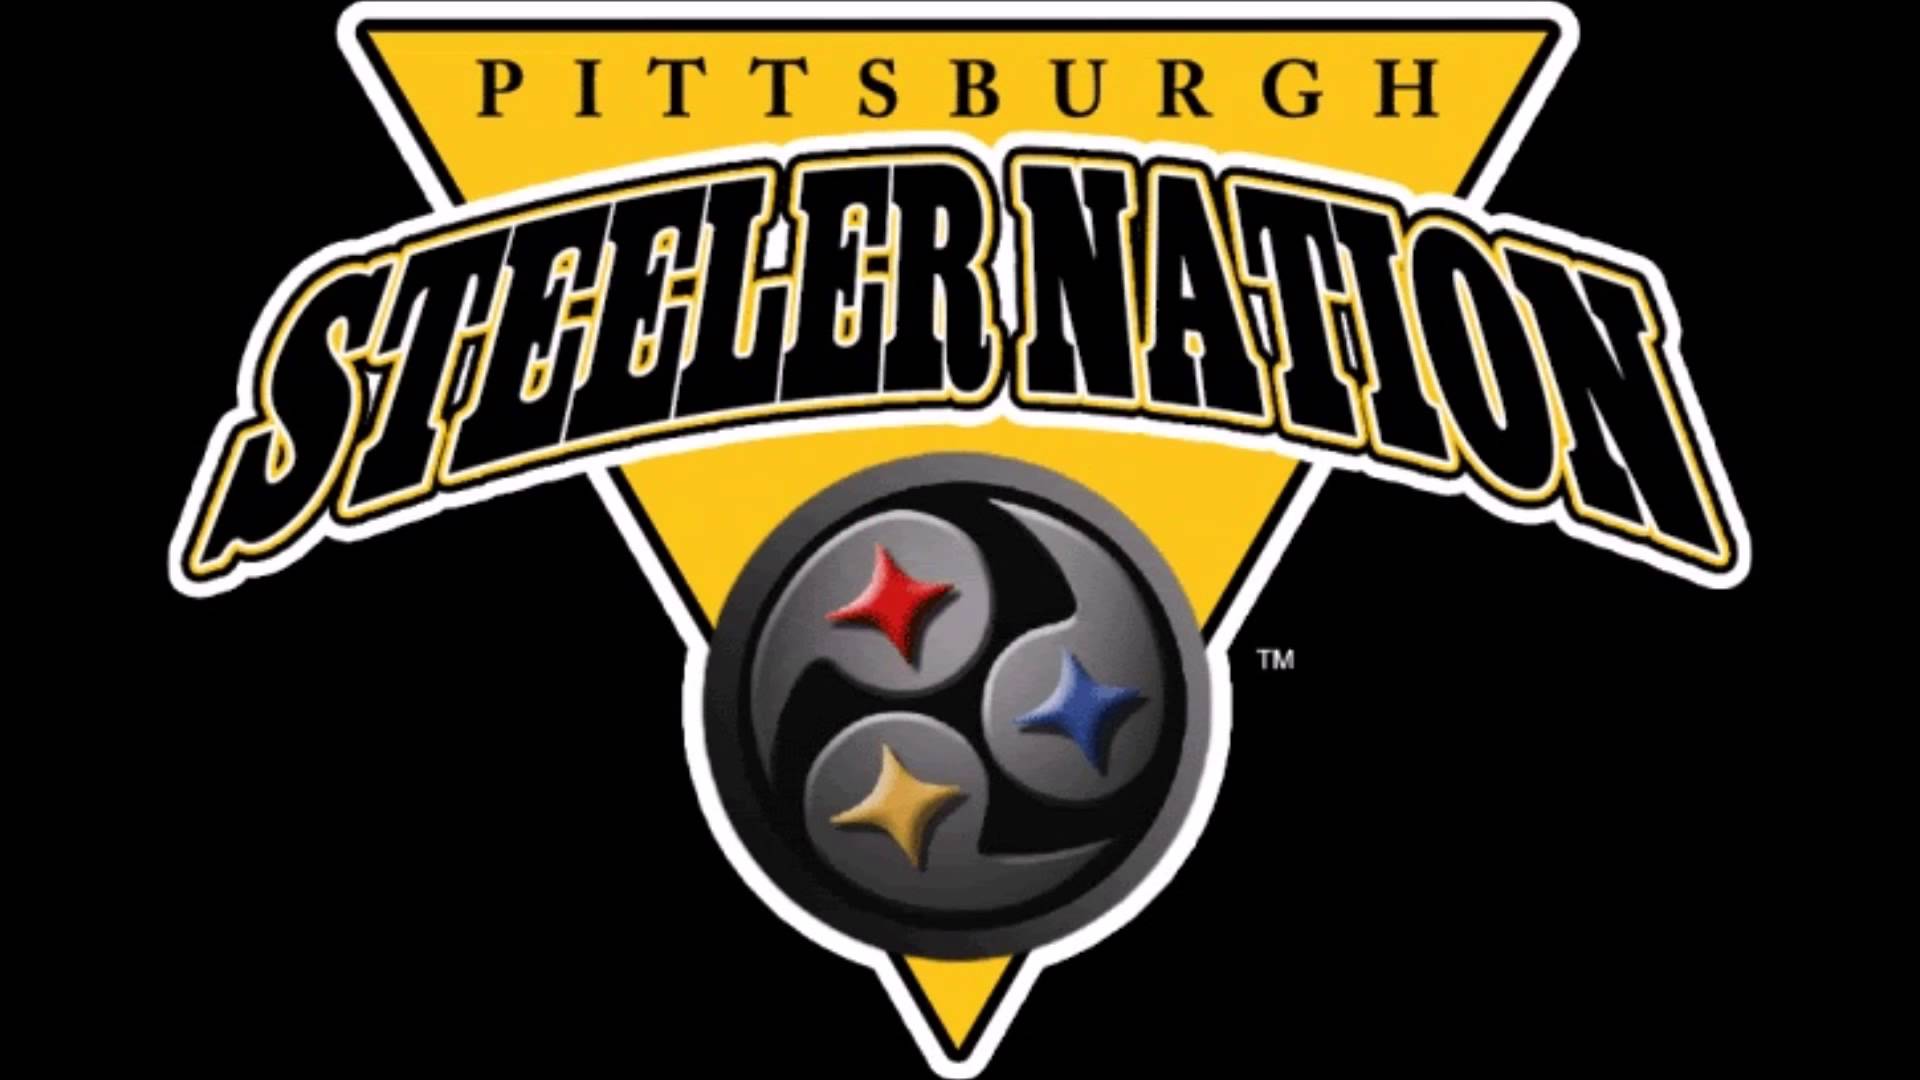 pittsburgh steelers wallpapers sports hq pittsburgh steelers pictures 4k wallpapers 2019 pittsburgh steelers wallpapers sports